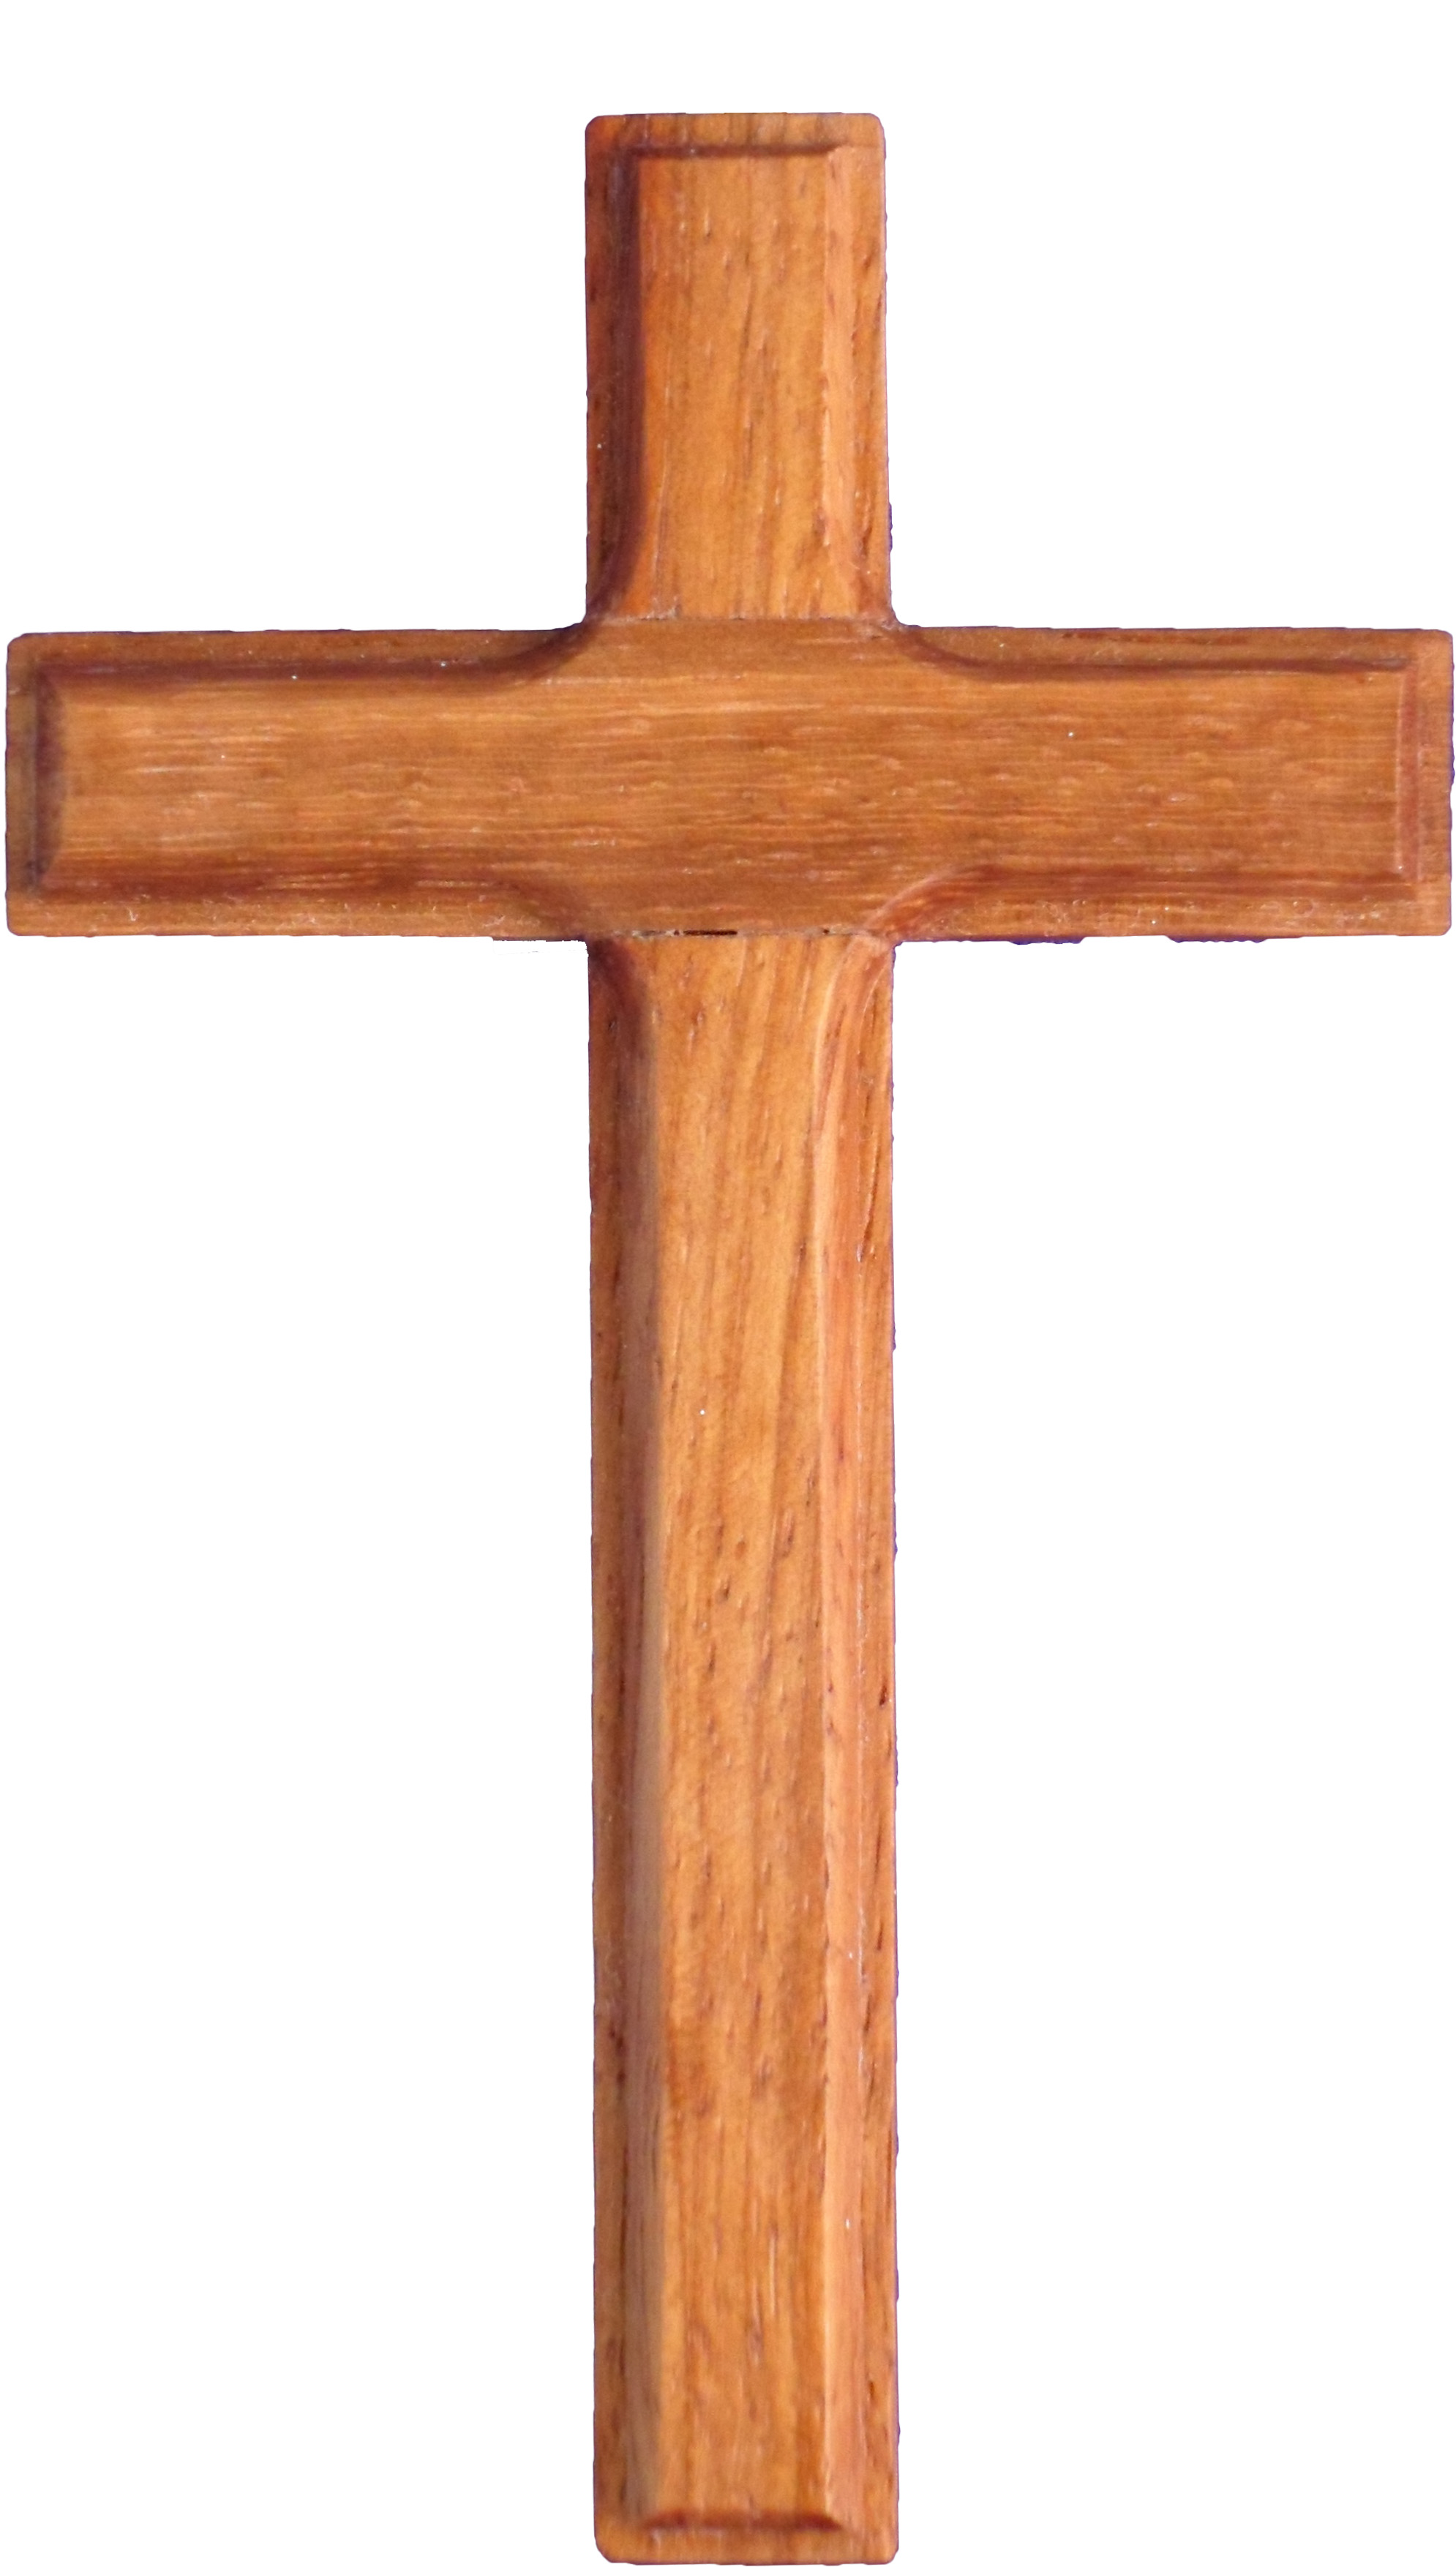 Wood Cross Clipart Wooden Cross Cake Ideas And